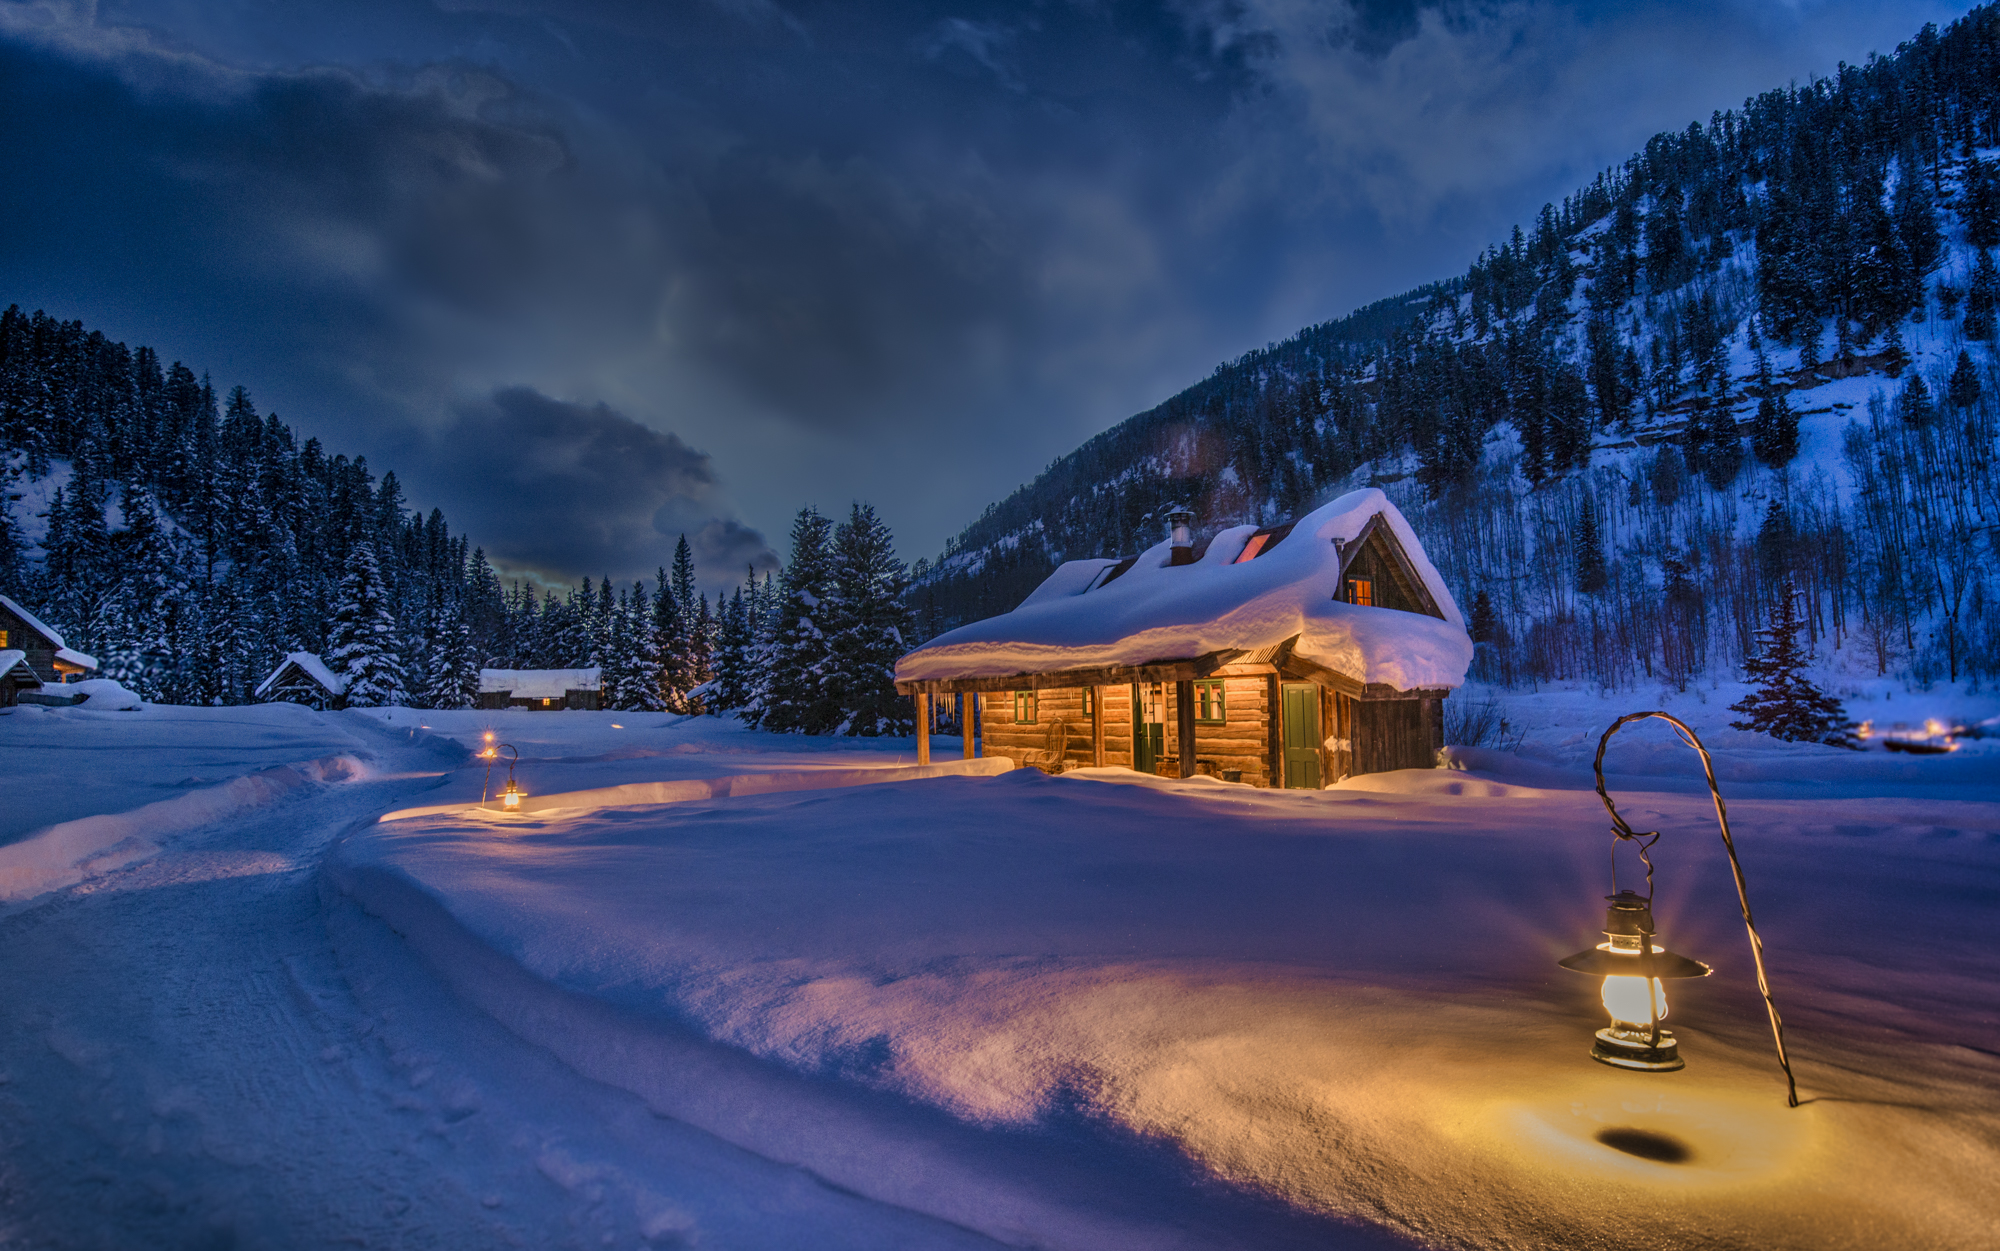 The Best Luxury Winter Lodges and Cabins for a Cozy Honeymoon Getaway